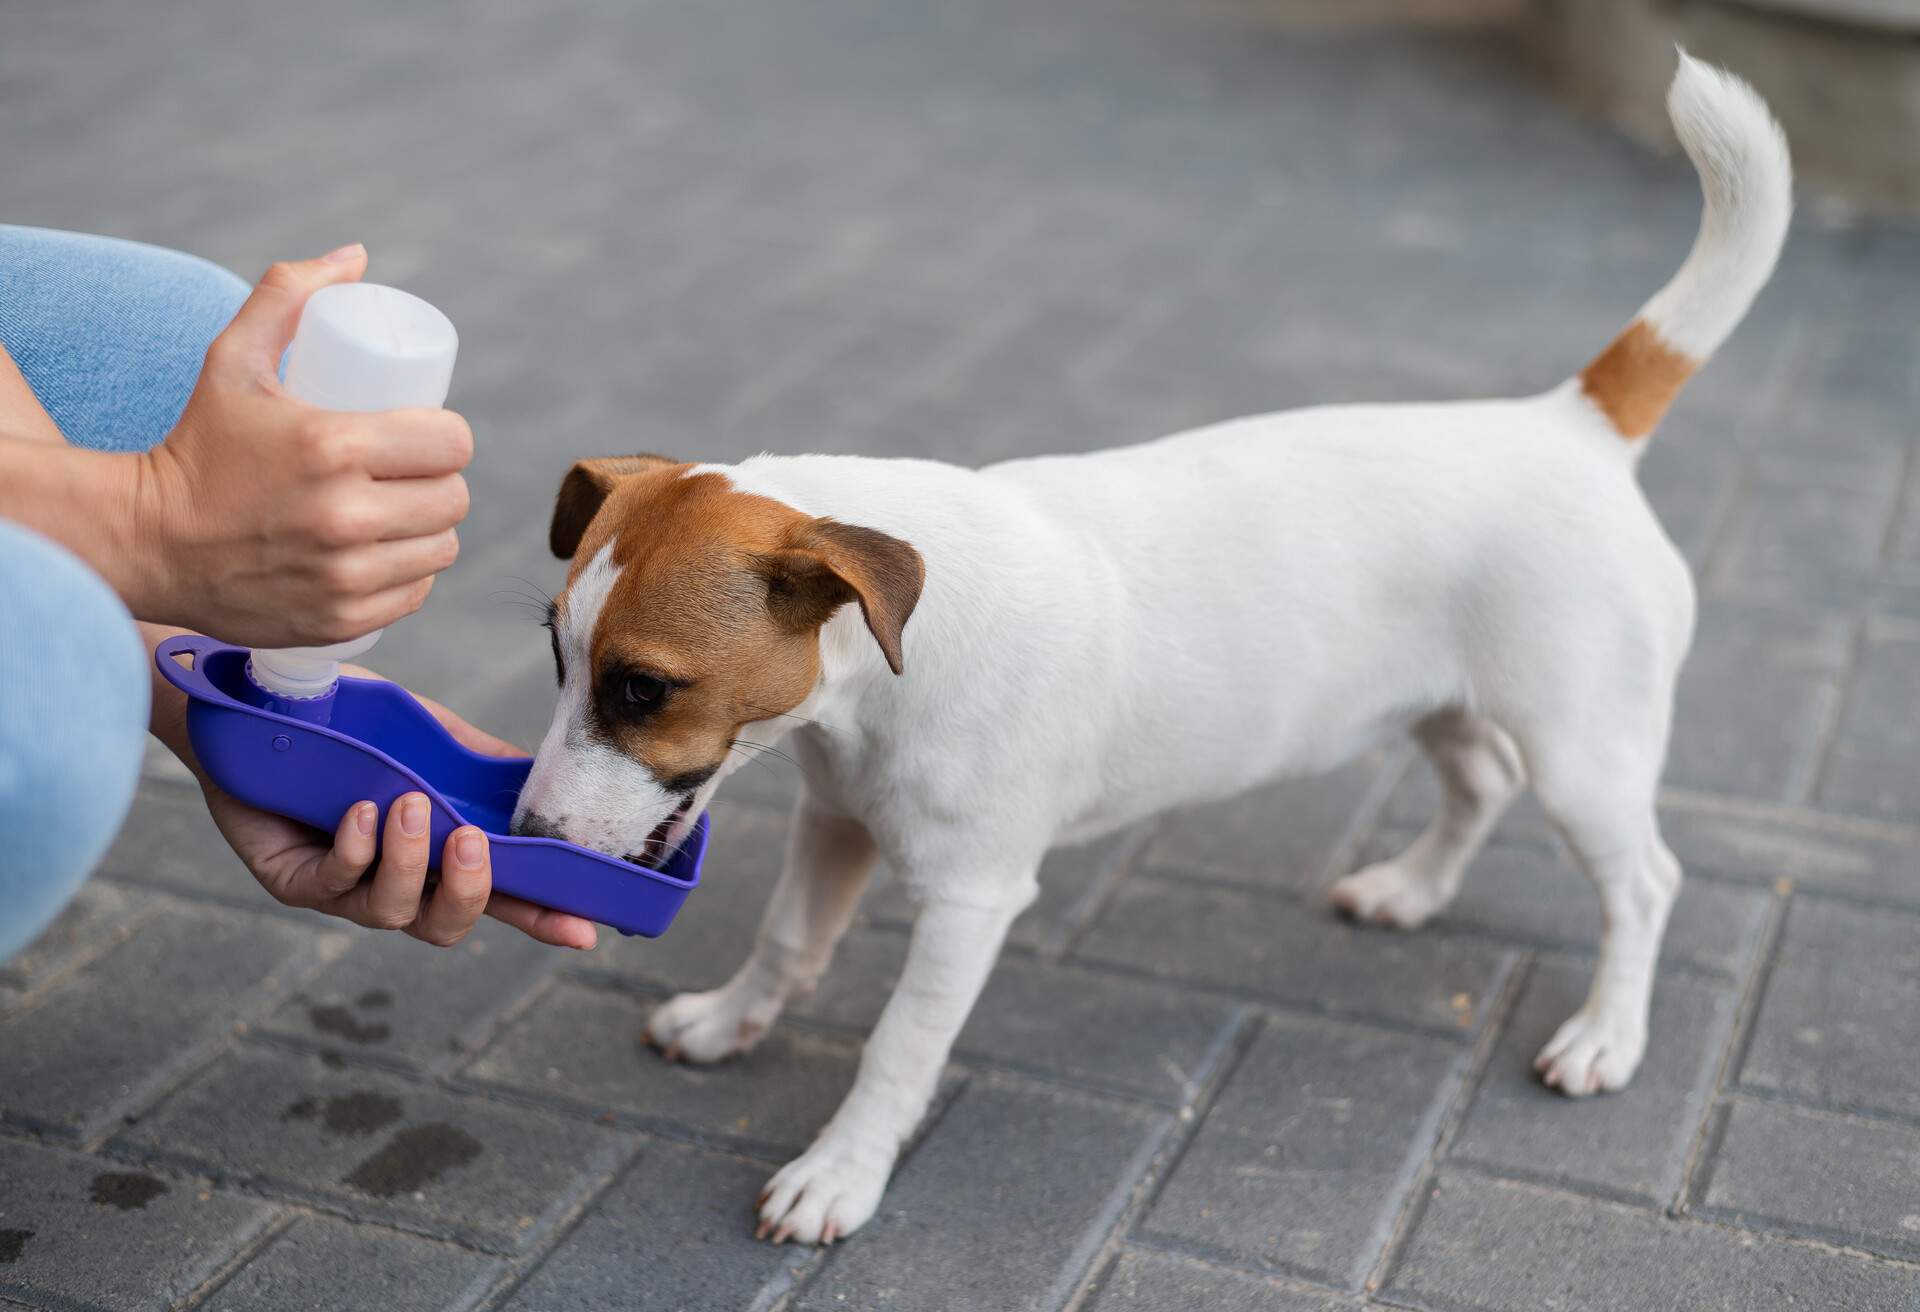 The dog drinks from a portable pet water bottle while walking with the owner.